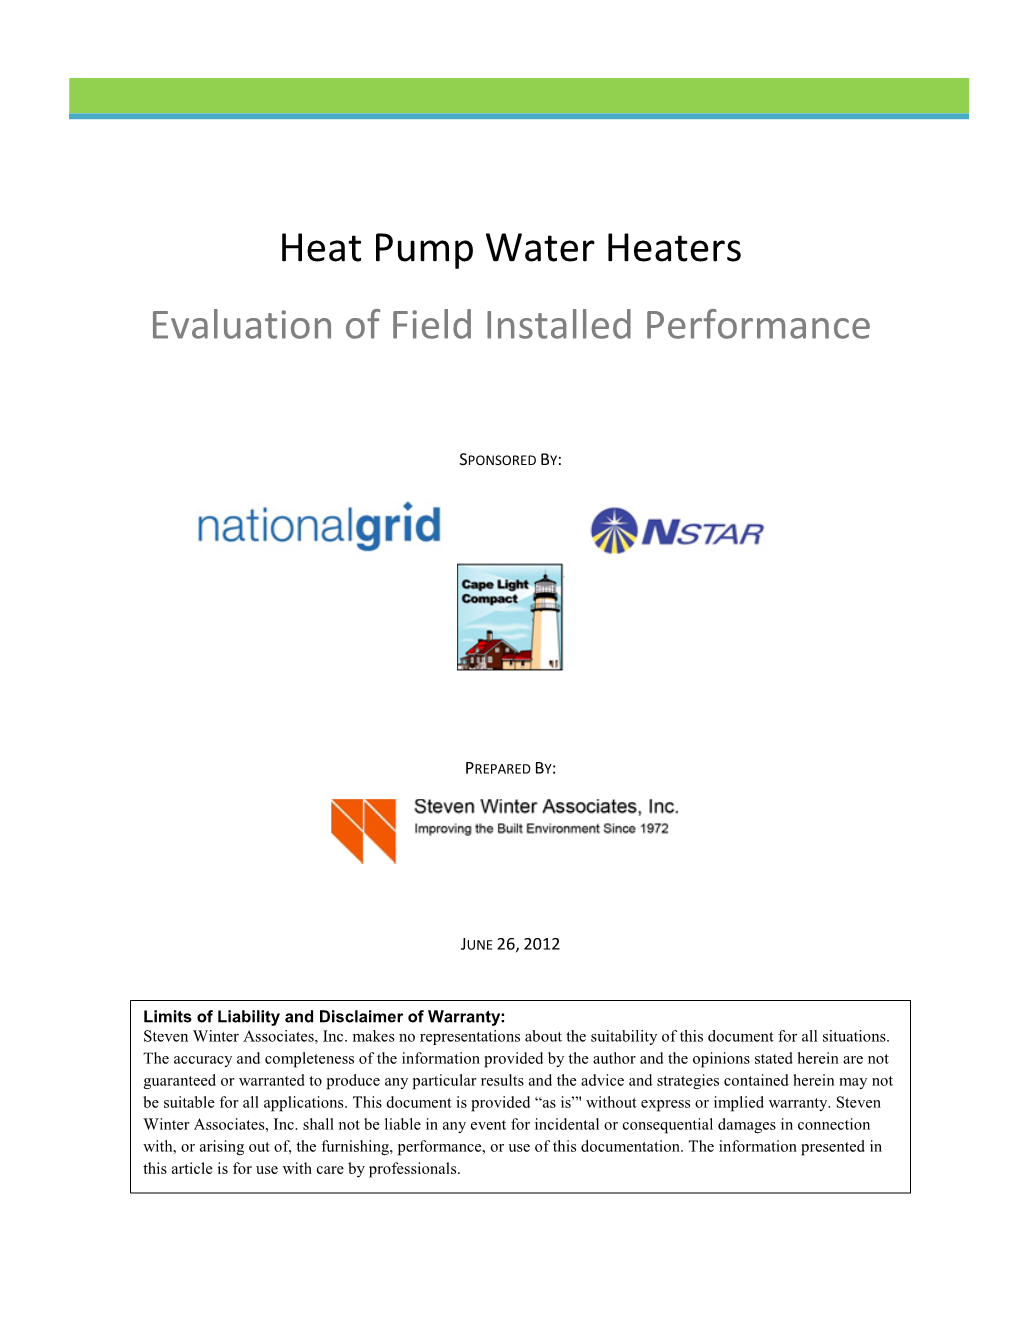 Heat Pump Water Heaters Evaluation of Field Installed Performance